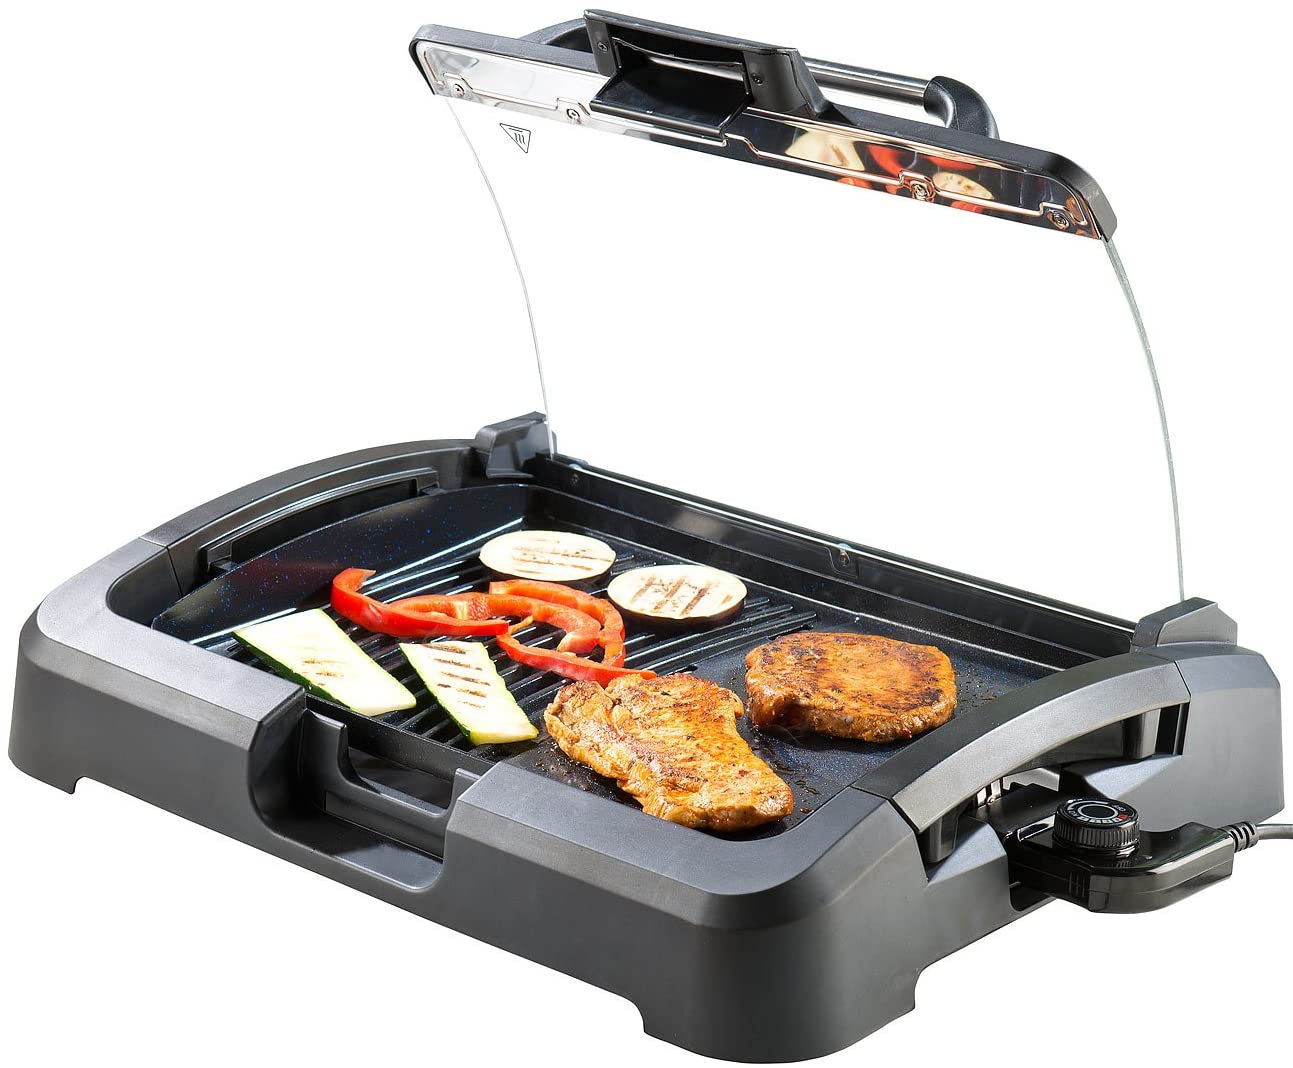 ROSENSTEIN & SOHNE Rosenstein & Söhne Electric grill: XL table grill with glass lid, ceramic coated grill plate, 2,200 W (electric table grill)